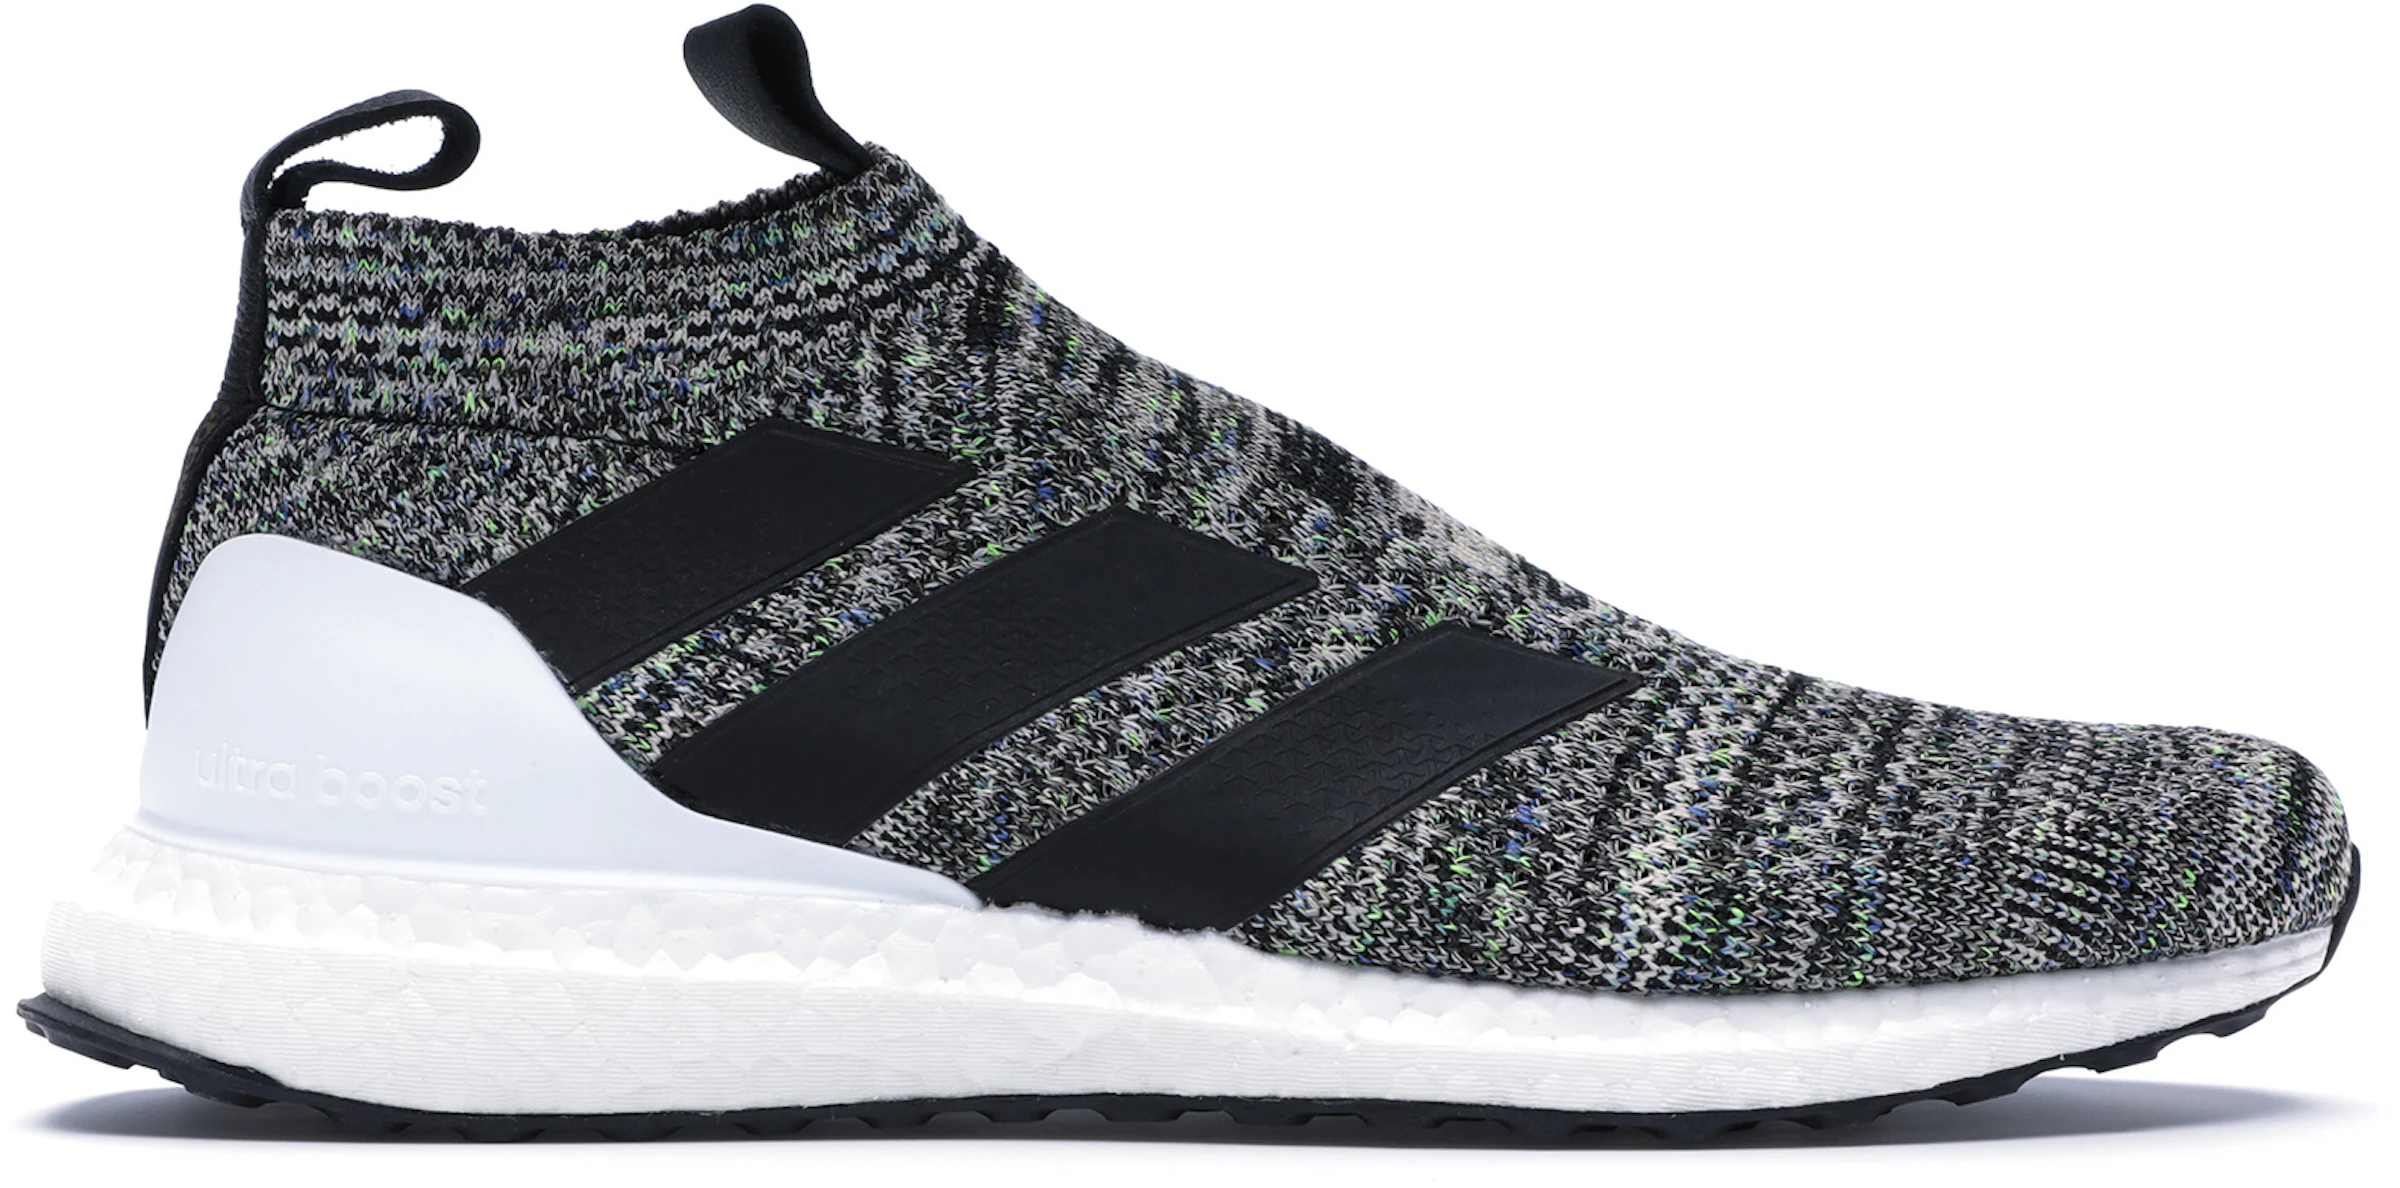 Oefening kunstmest strijd adidas ACE 16+ Ultra Boost Oreo - AC7749 - US